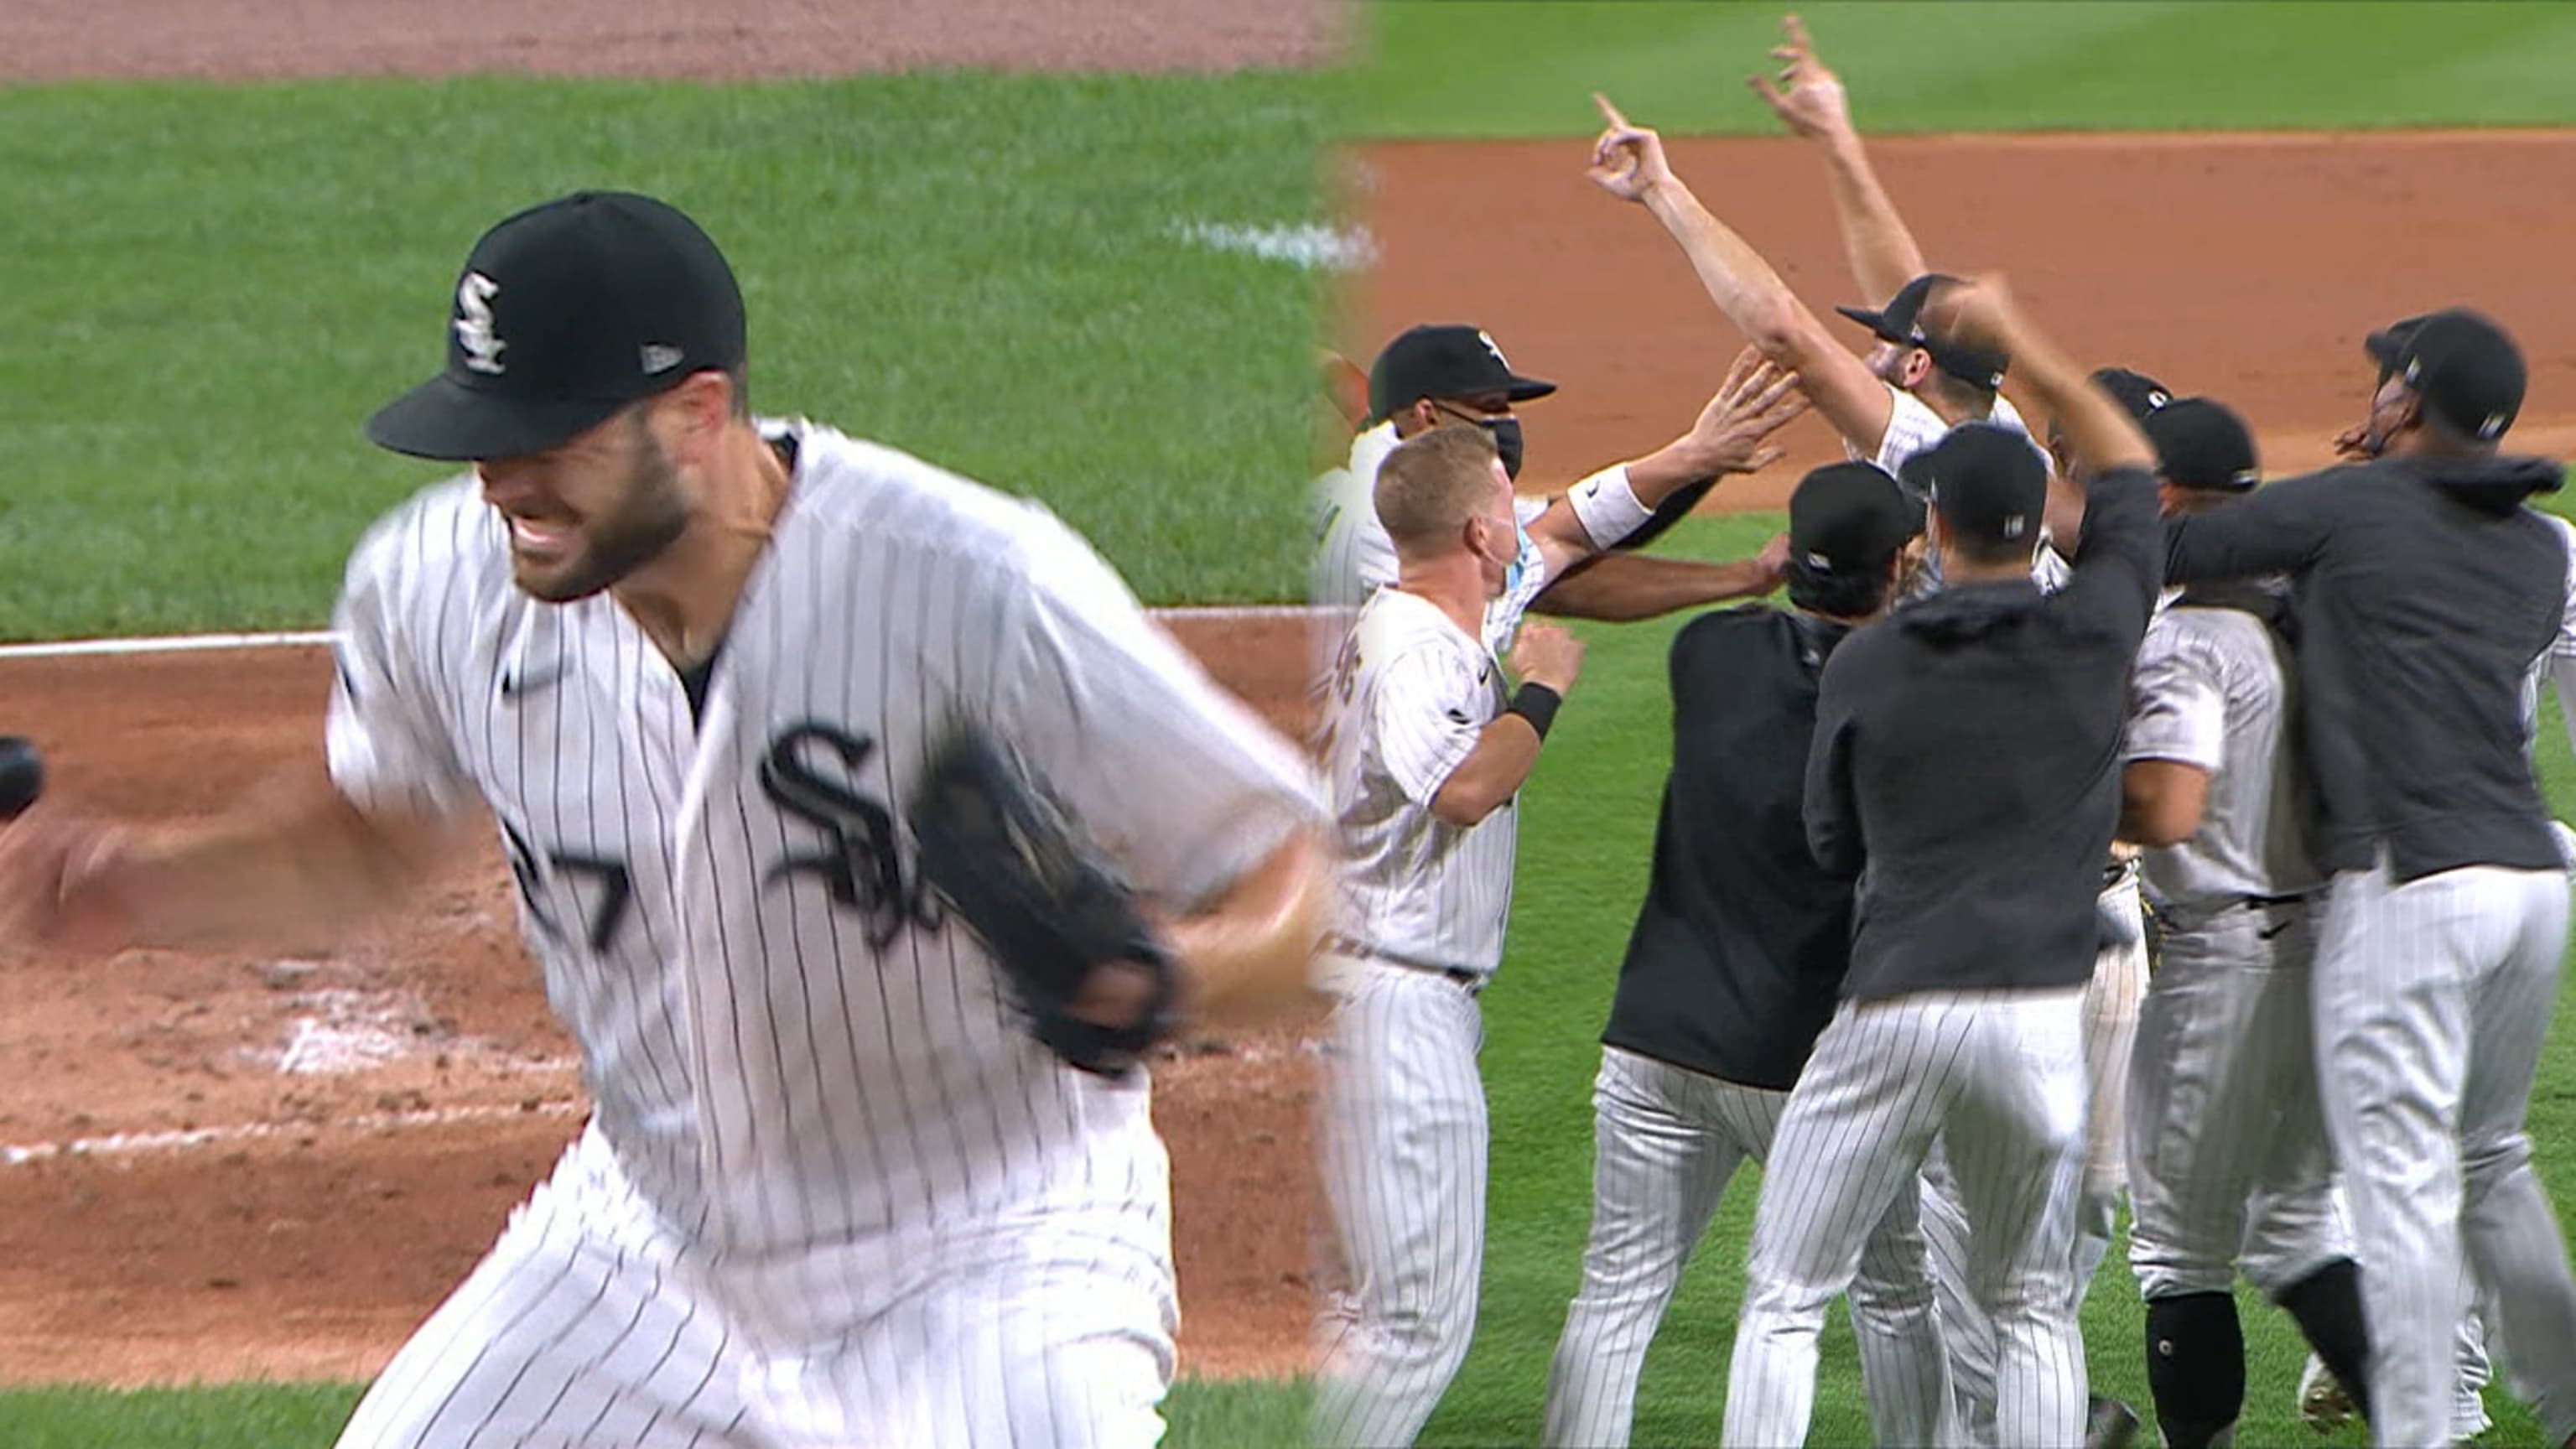 Lucas Giolito working on no-hitter against Yankees through six innings –  KGET 17